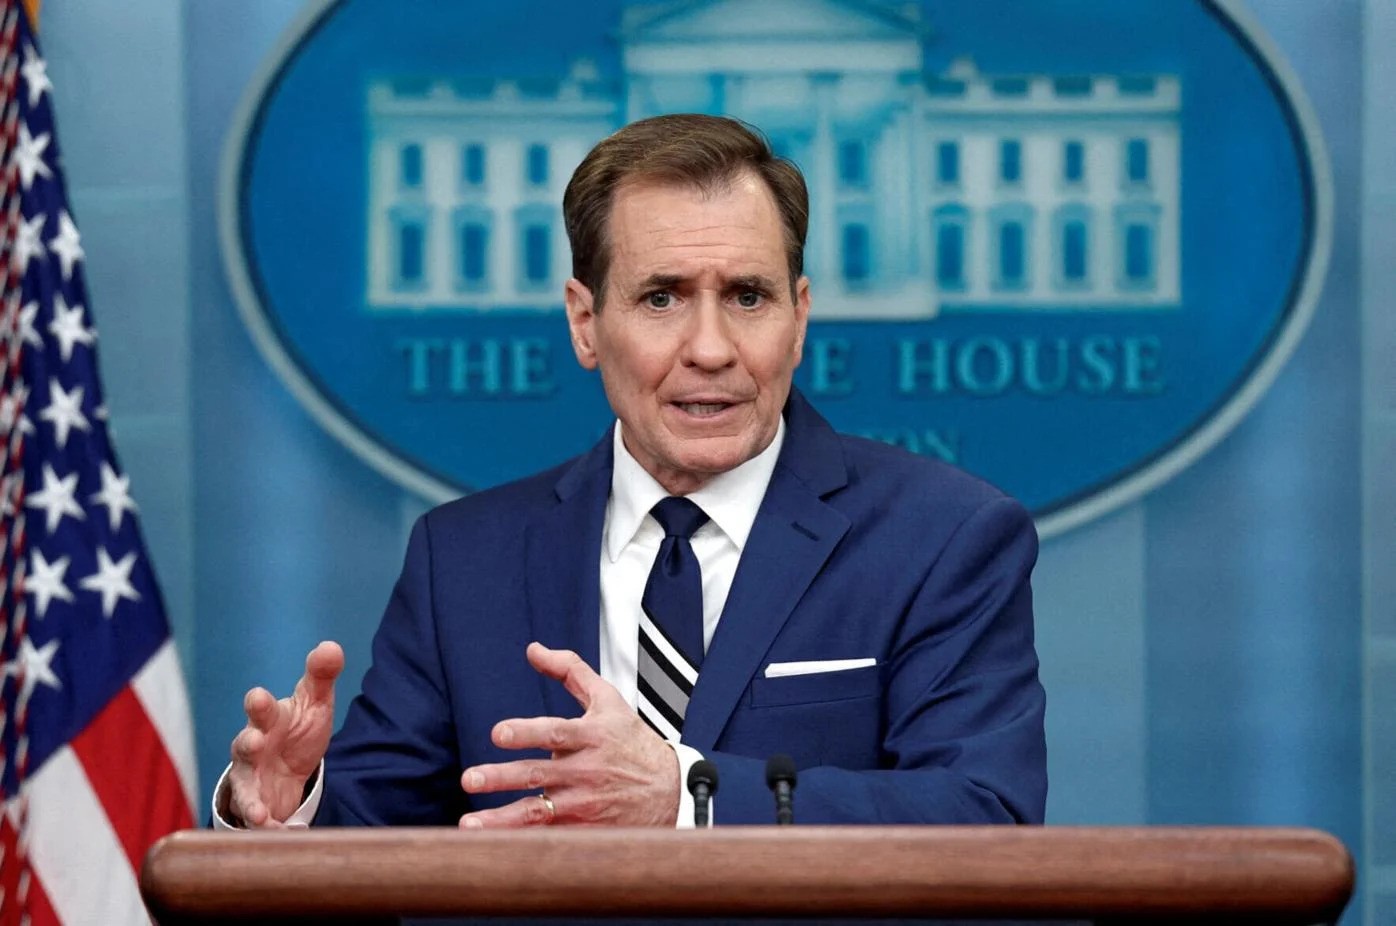 John Kirby during a speech at the White House